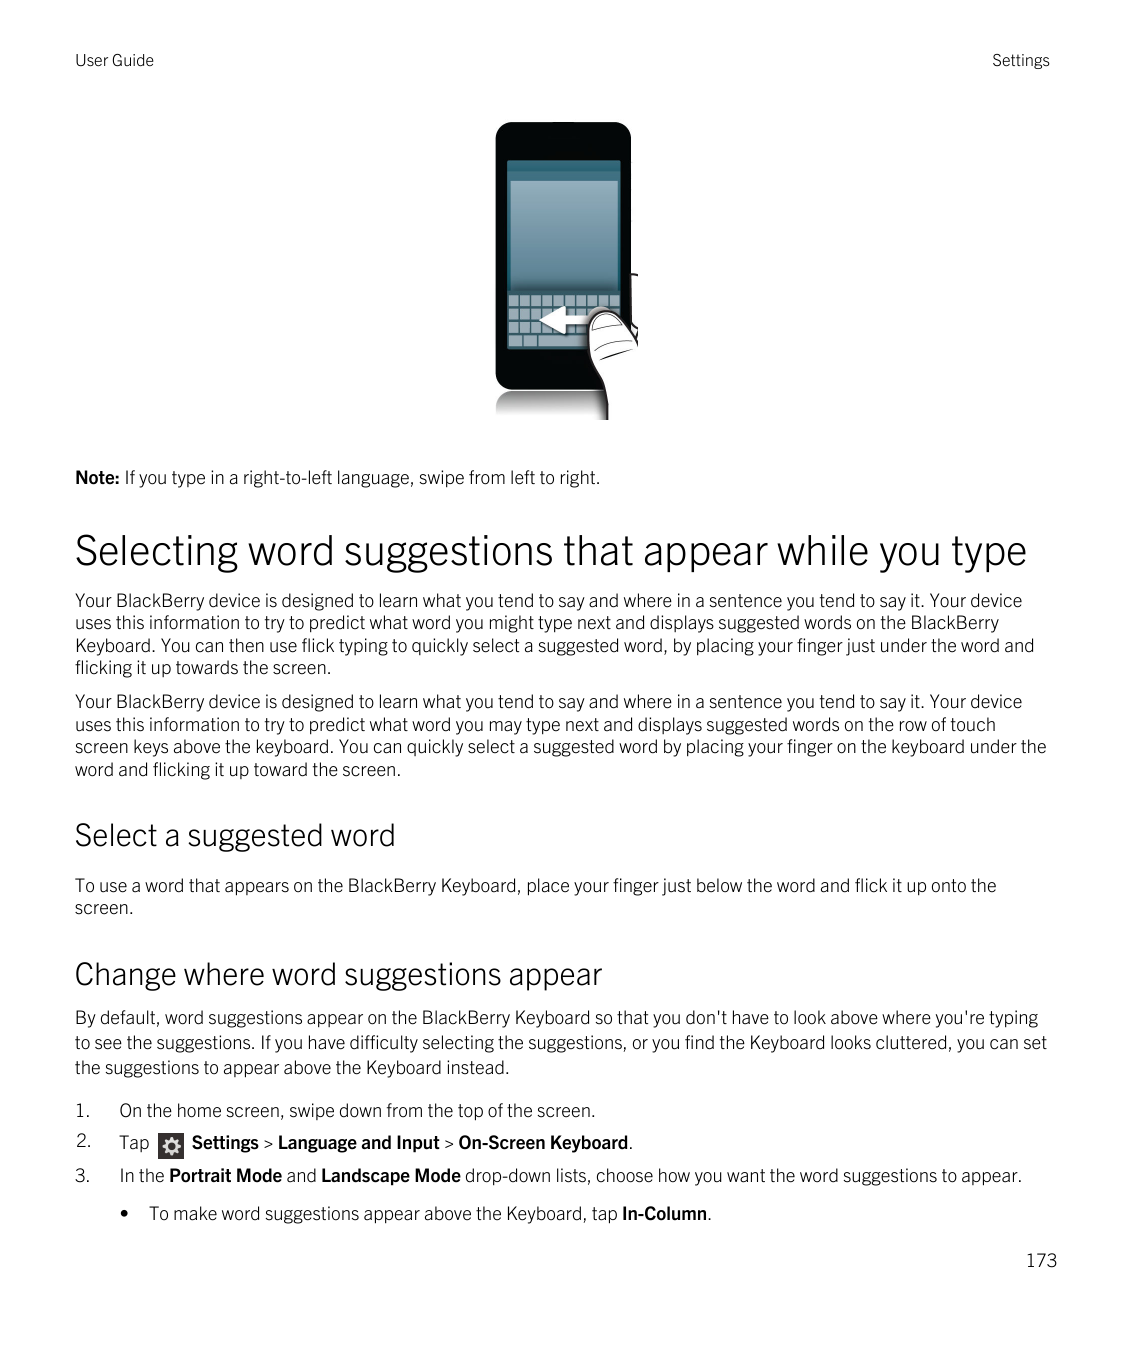 User GuideSettingsNote: If you type in a right-to-left language, swipe from left to right.Selecting word suggestions that appear